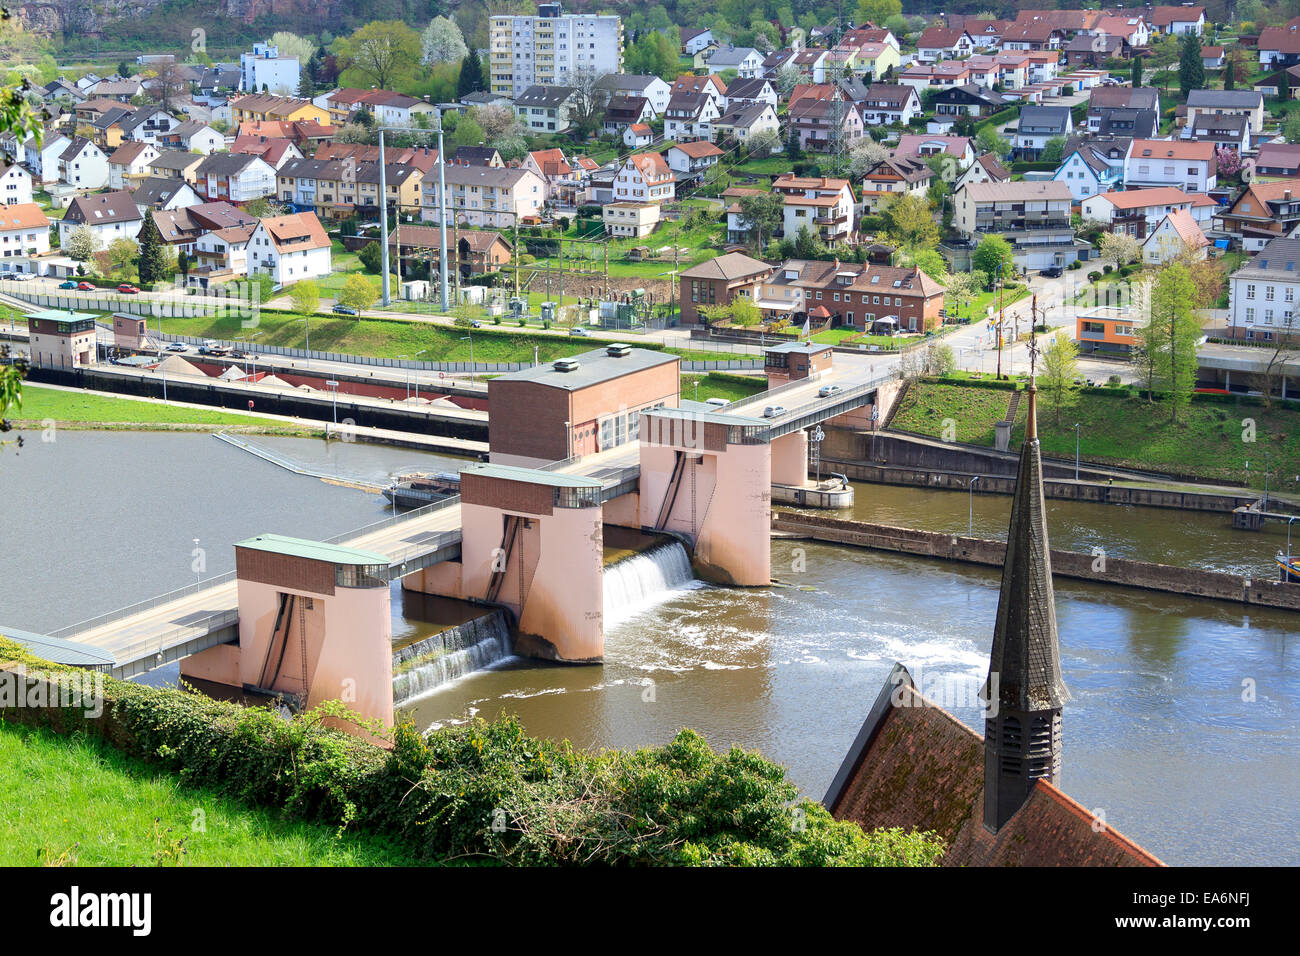 A lock and weir system at Hirschhorn in the Neckar Valley, Hesse, Germany Stock Photo